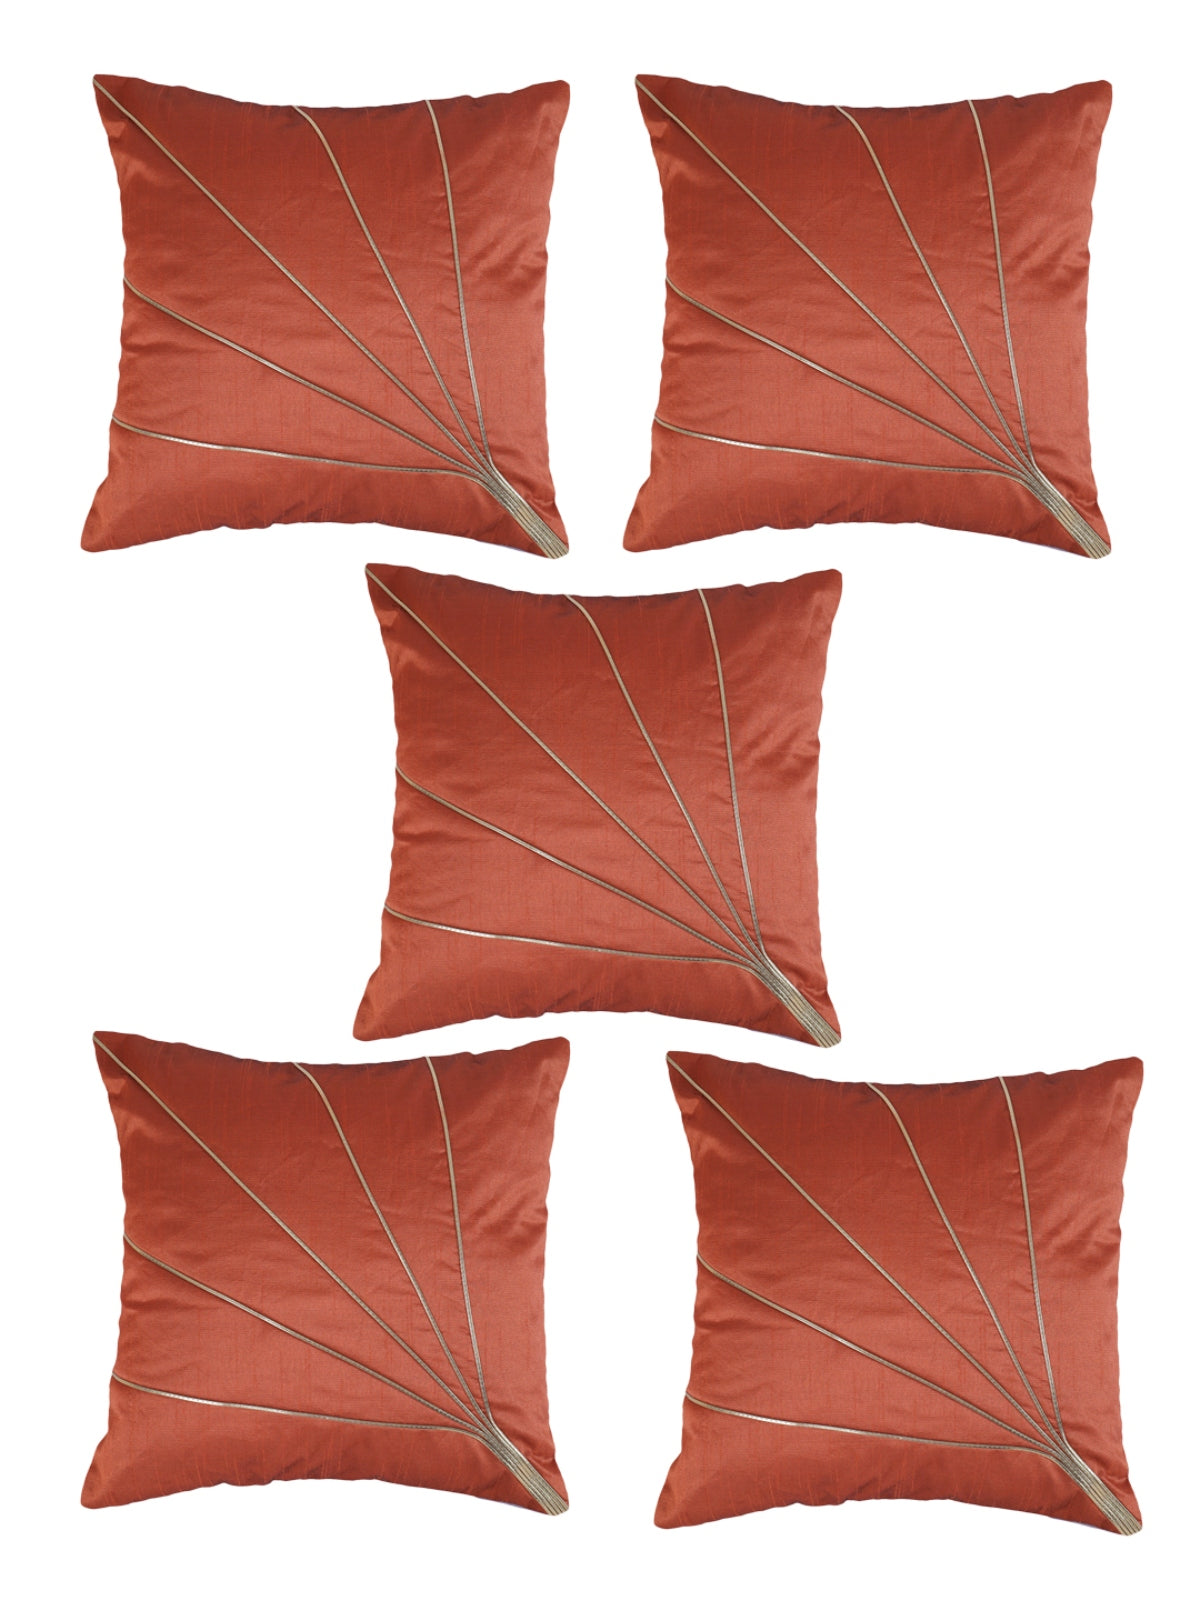 Polyester Cushion Covers 16x16 inches, Set of 5 - Orange